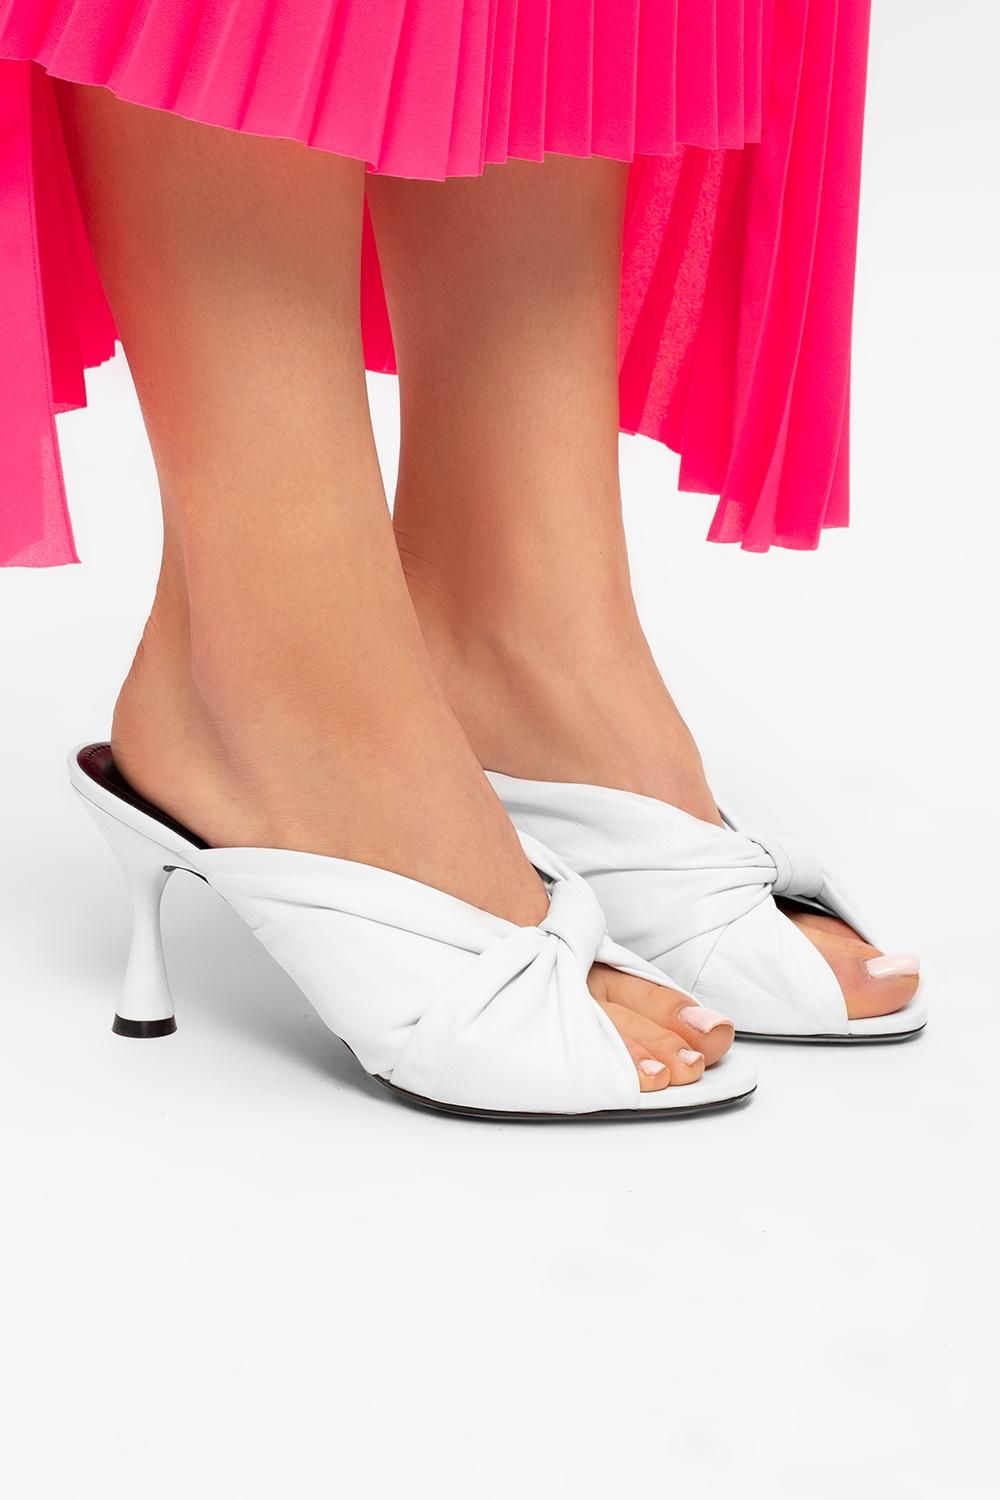 Balenciaga Leather 'drapy' Heeled Mules in White | Lyst